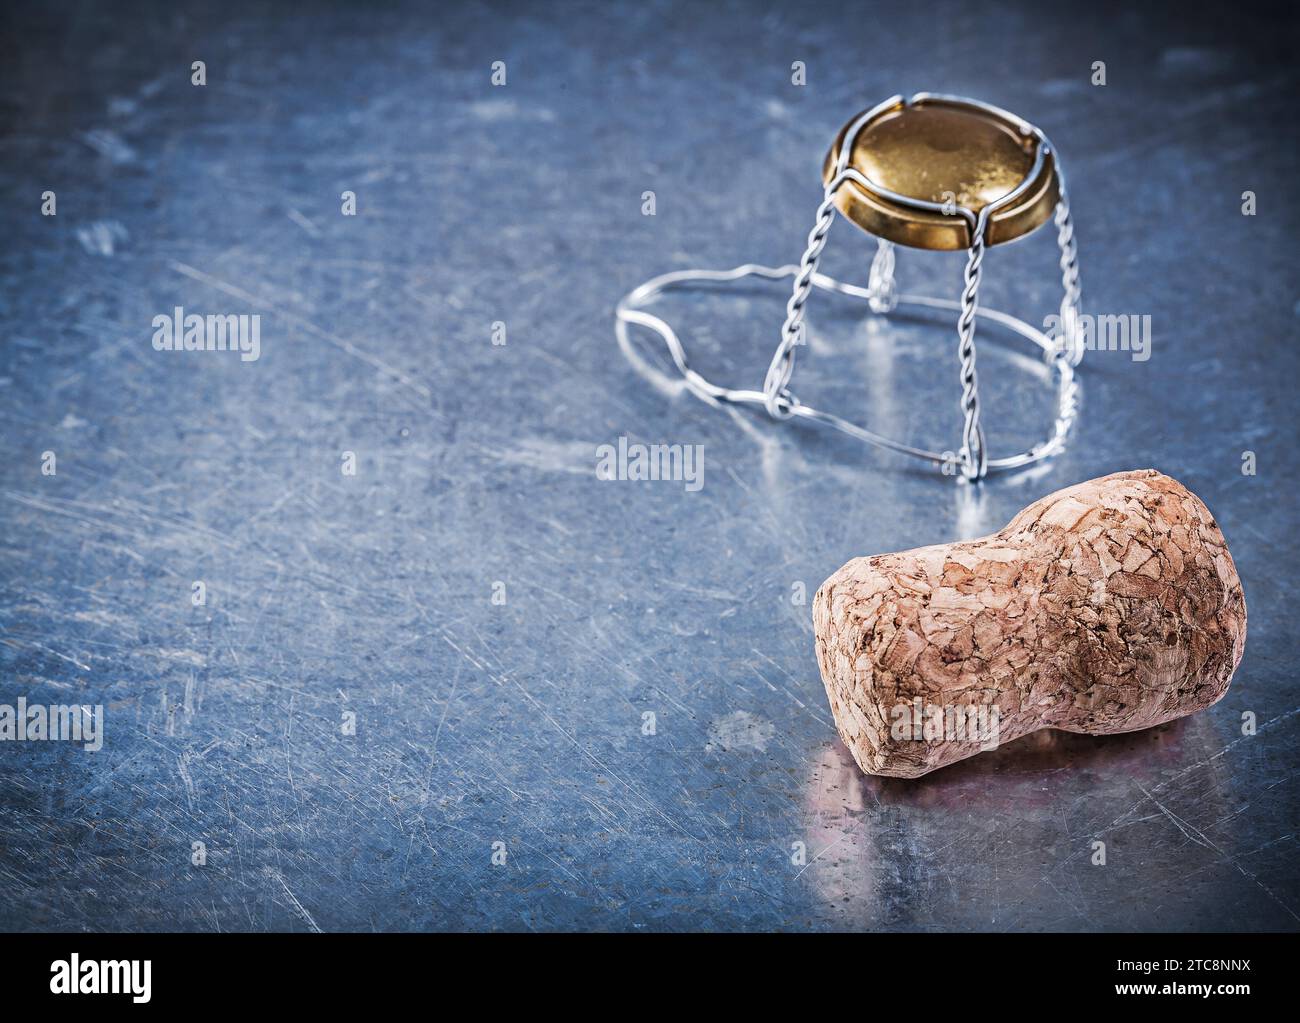 Cork stopper with twisted wire on scratched metallic background Stock Photo